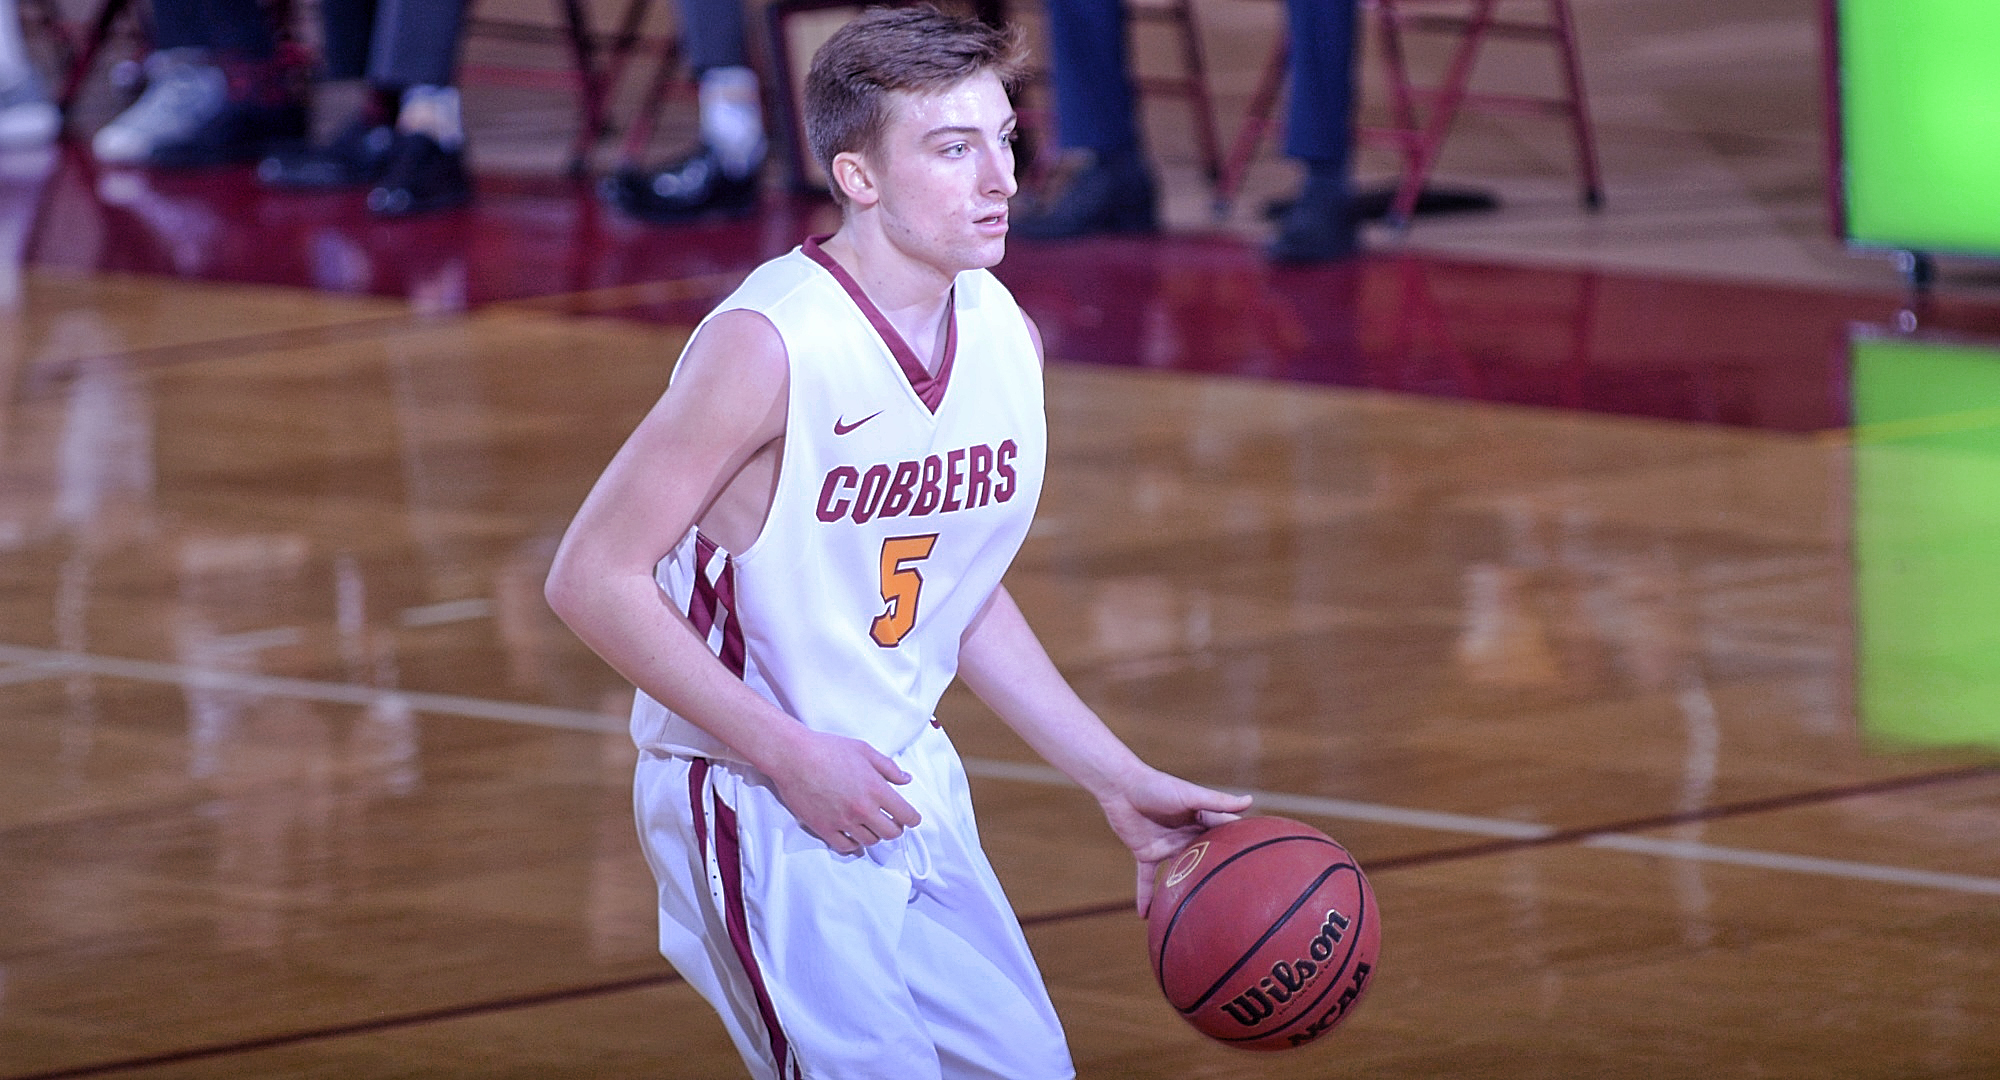 Sophomore guard Bryden Urie had a career-high 25 points in the Cobbers' game at Minn.-Crookston.